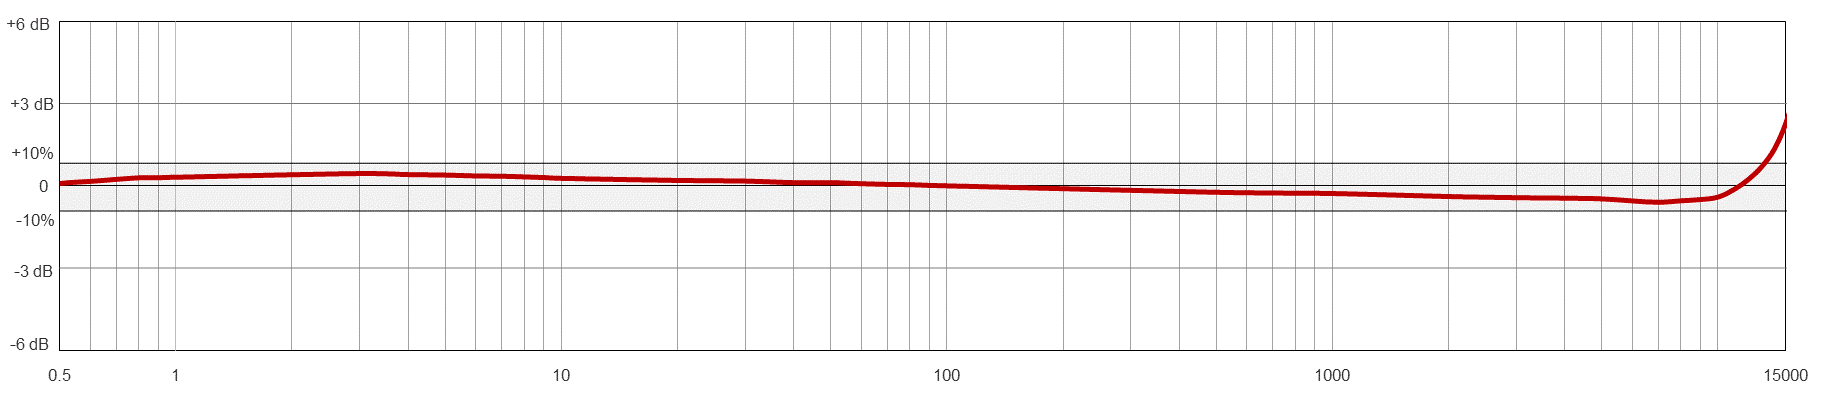 A line graph showing the frequency resopnse of a CTC AC915-M12A condition monitoring sensor.